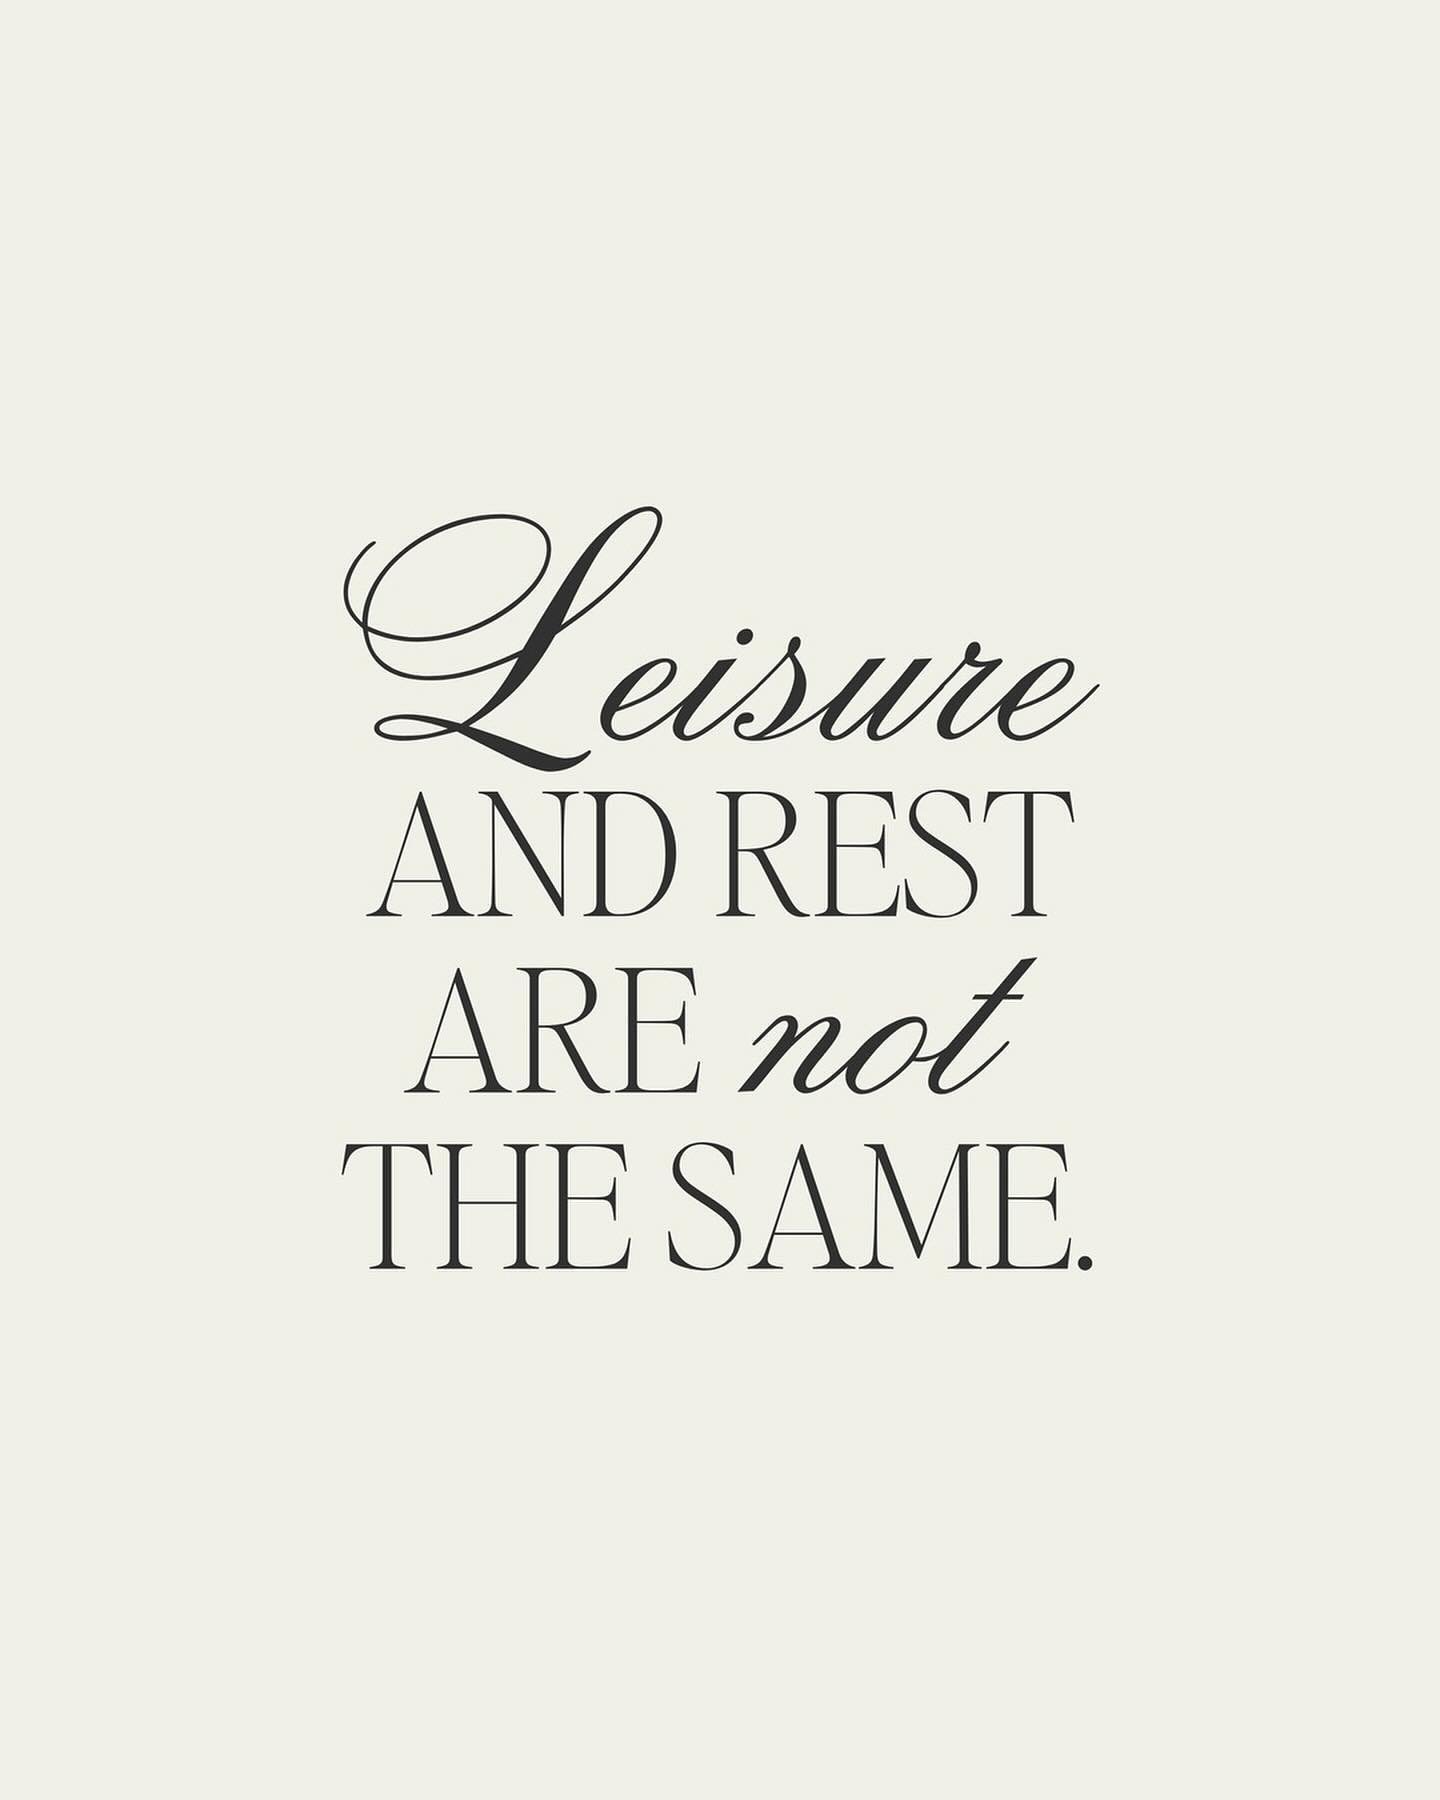 We discount ourselves from rest because we confuse it with leisure. We believe (falsely) that rest is for those without obligation. We&rsquo;re sold lies from a culture that profits off our pursuit of a recreation that can&rsquo;t be bought or sold.
